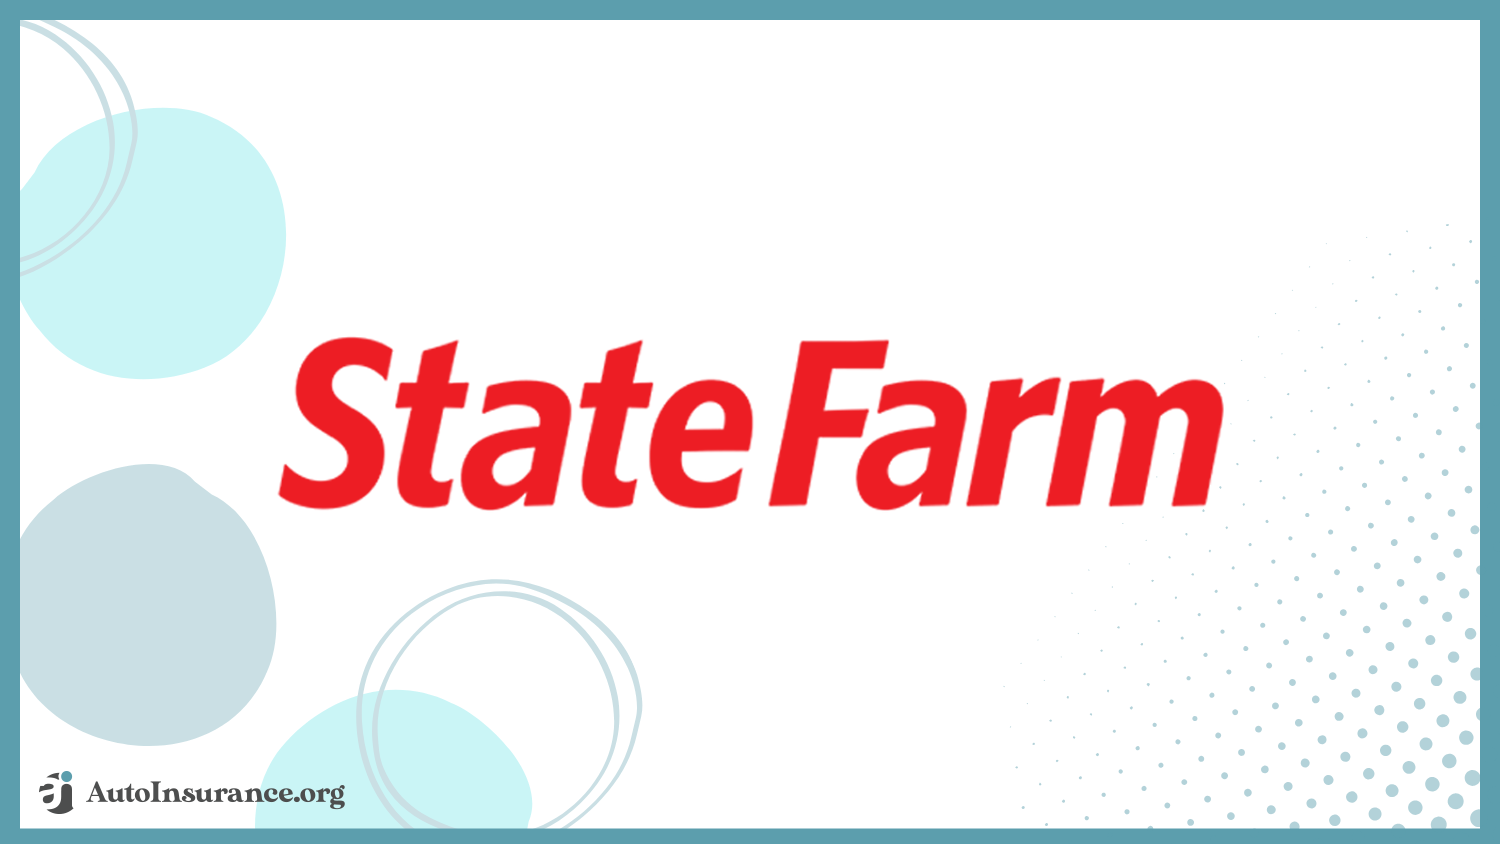 State Farm: Best Auto Insurance for Dealerships